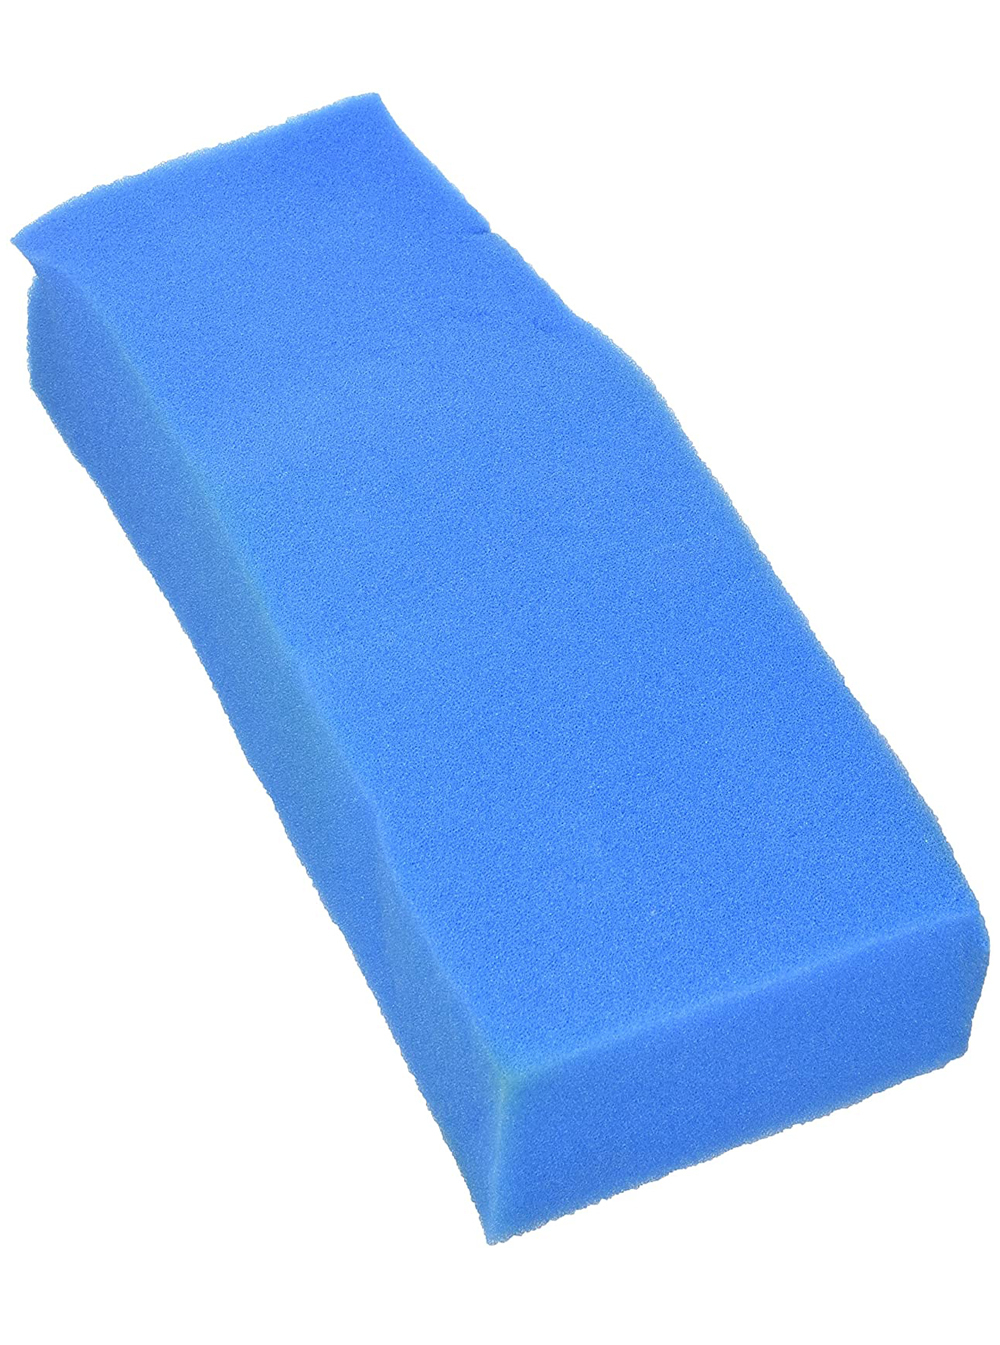 RCI 7050A Fuel Cell Safety Foam, 3 x 6 x 16 in, Each